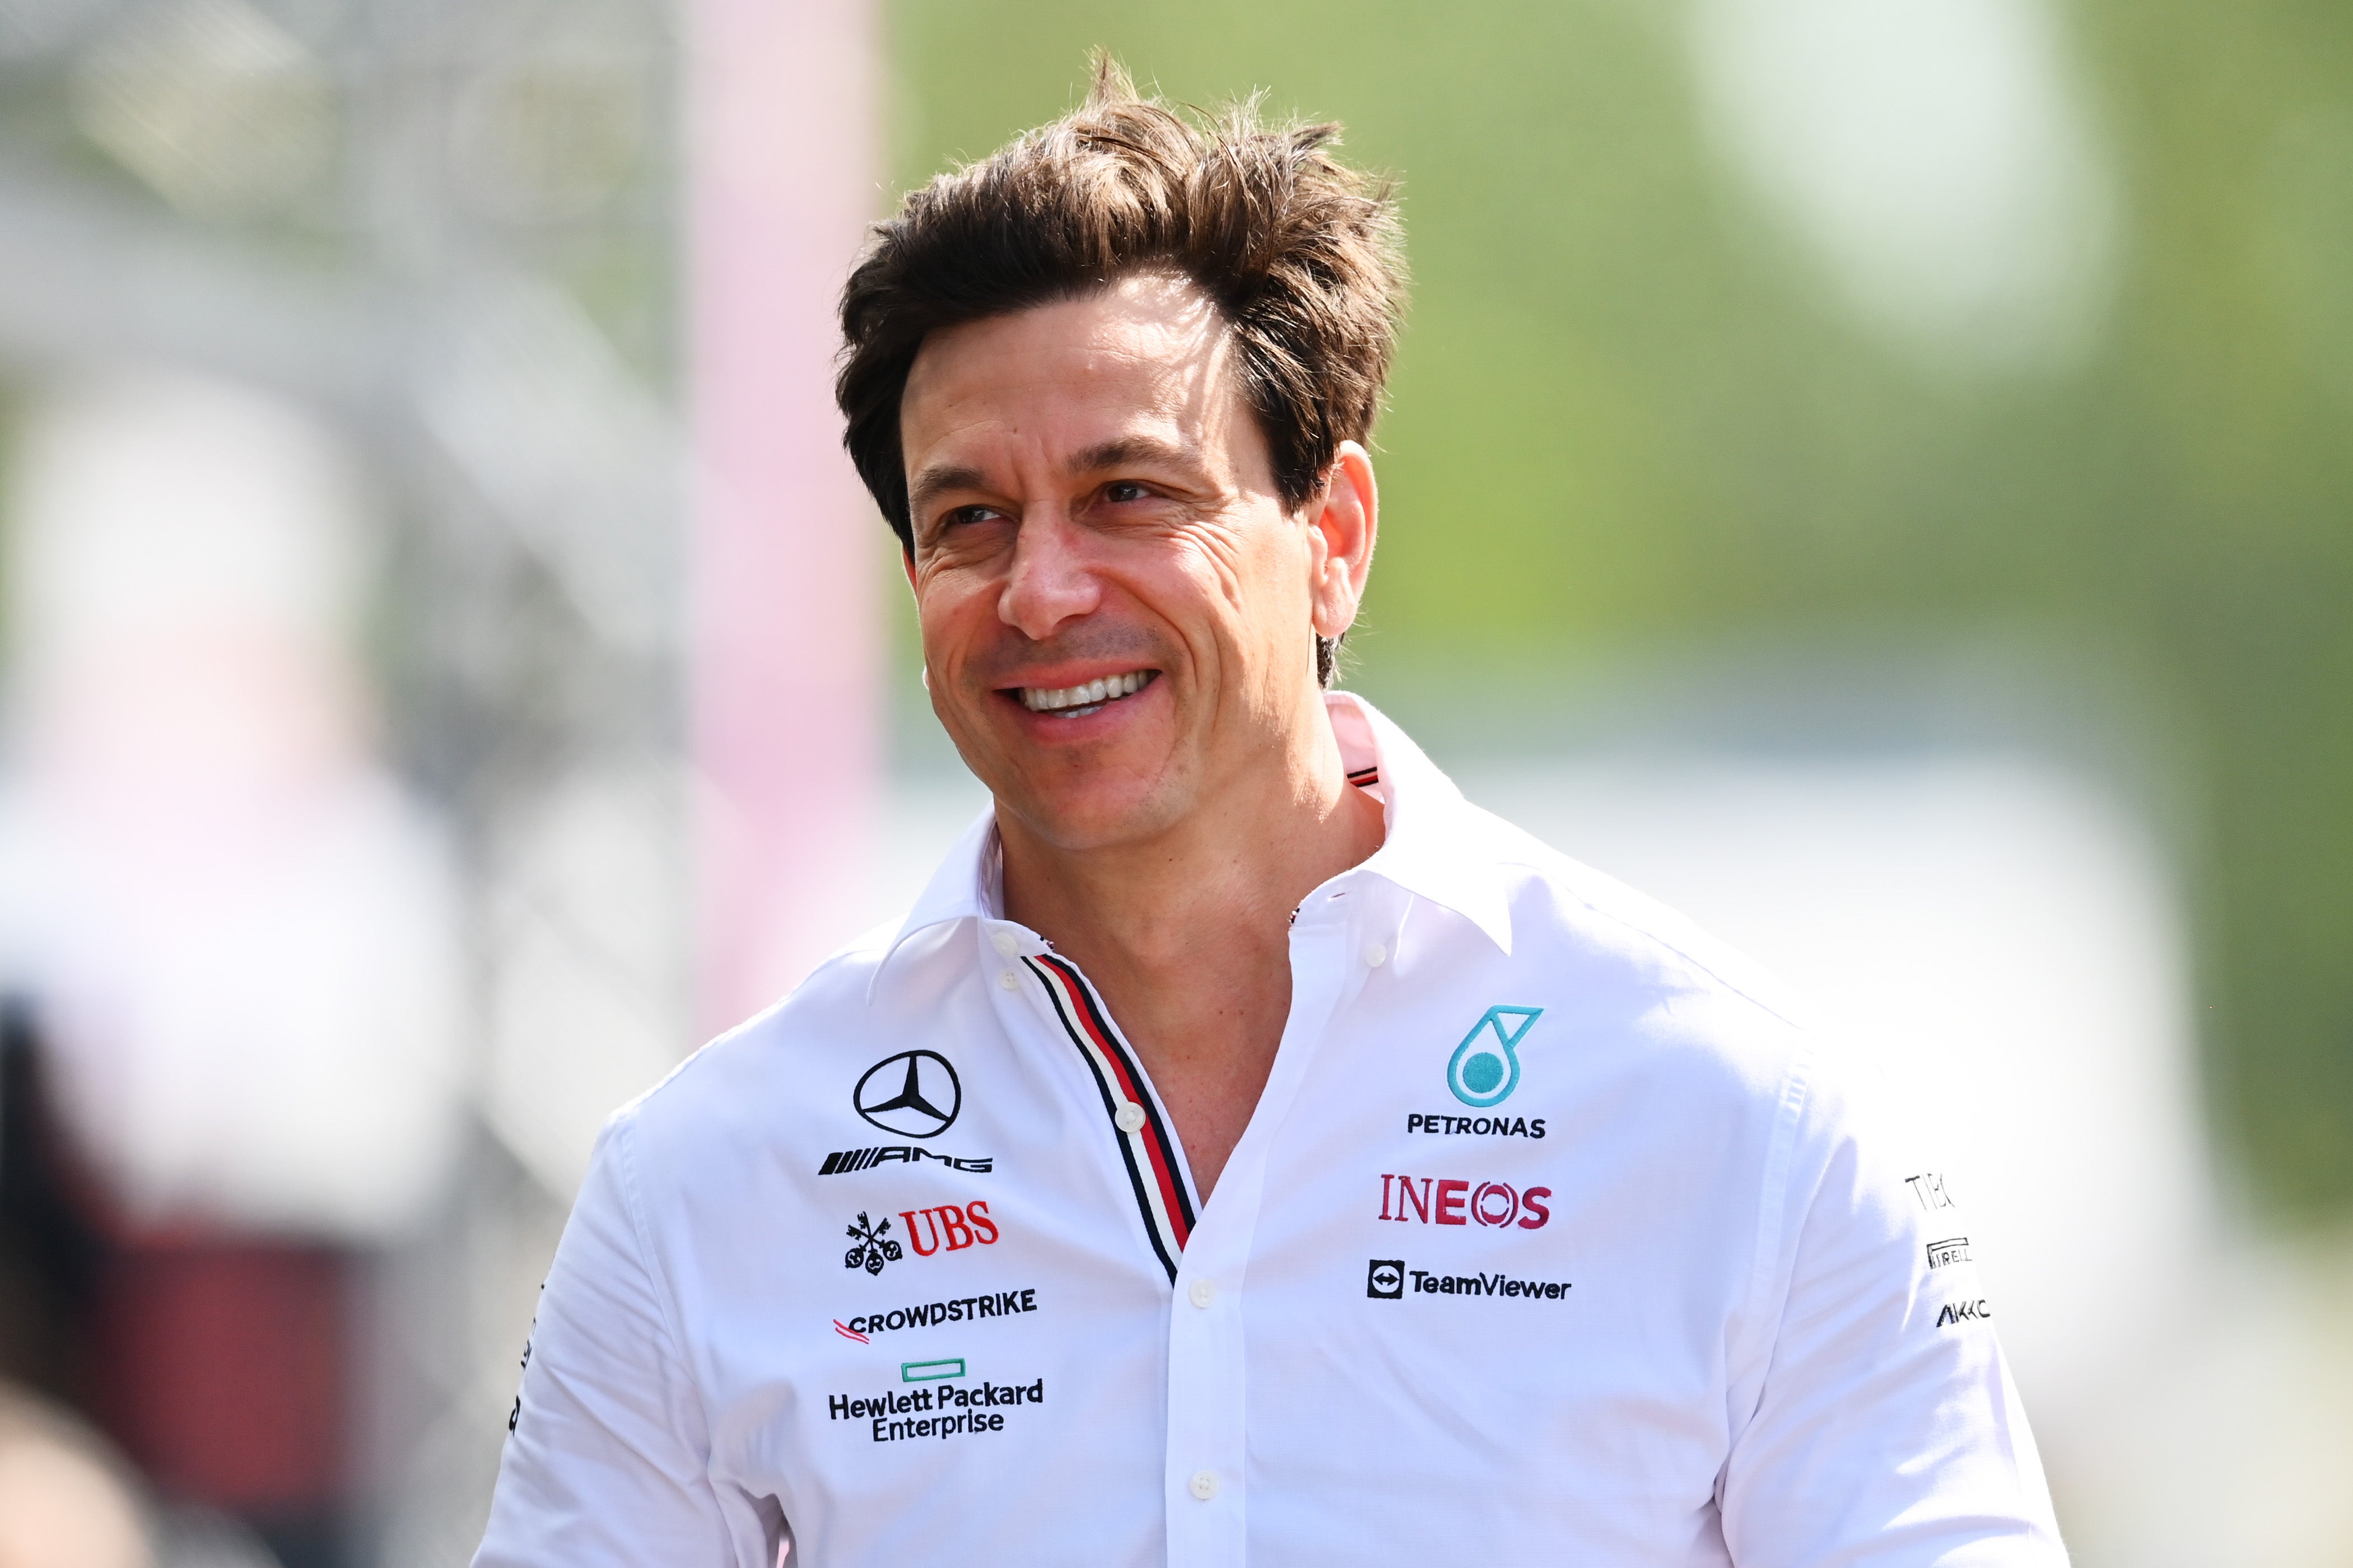 Toto Wolff enjoyed a strong performance from Mercedes in Barcelona